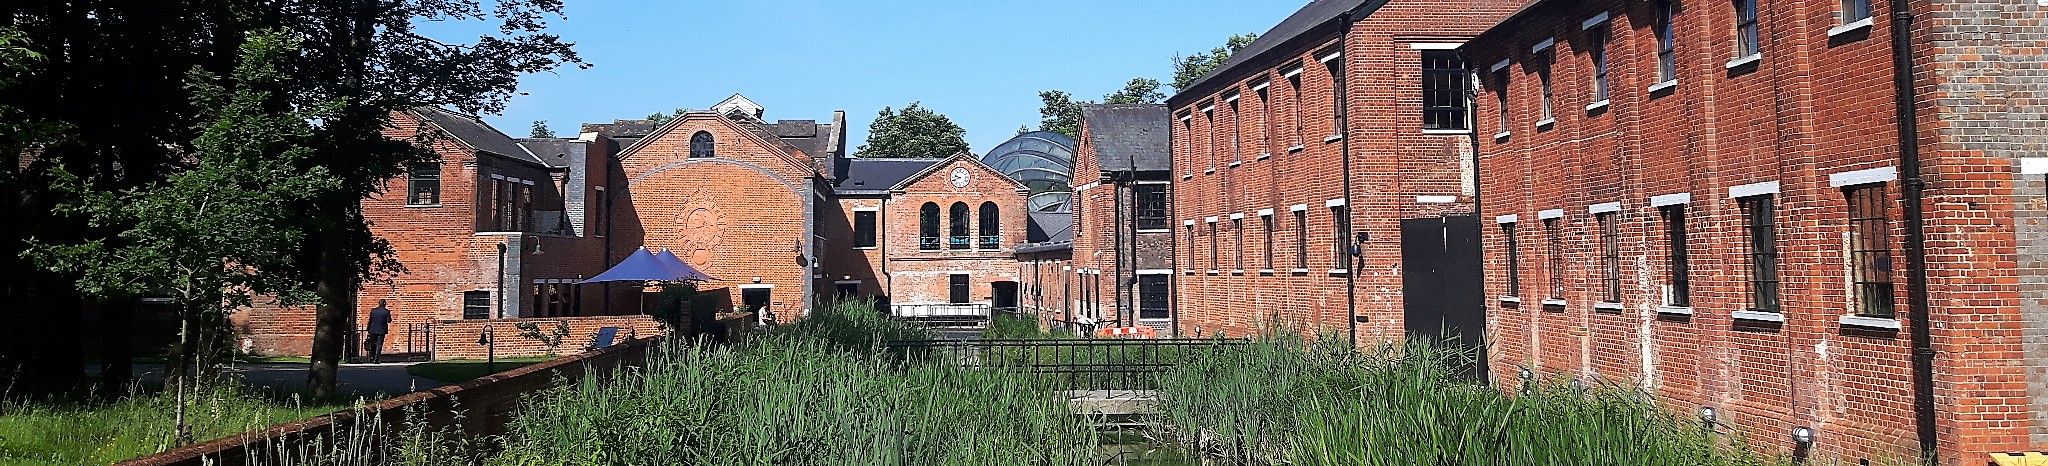 The Bombay Sapphire Distillery buildings at Laverstoke near Whitchurch in Hampshire